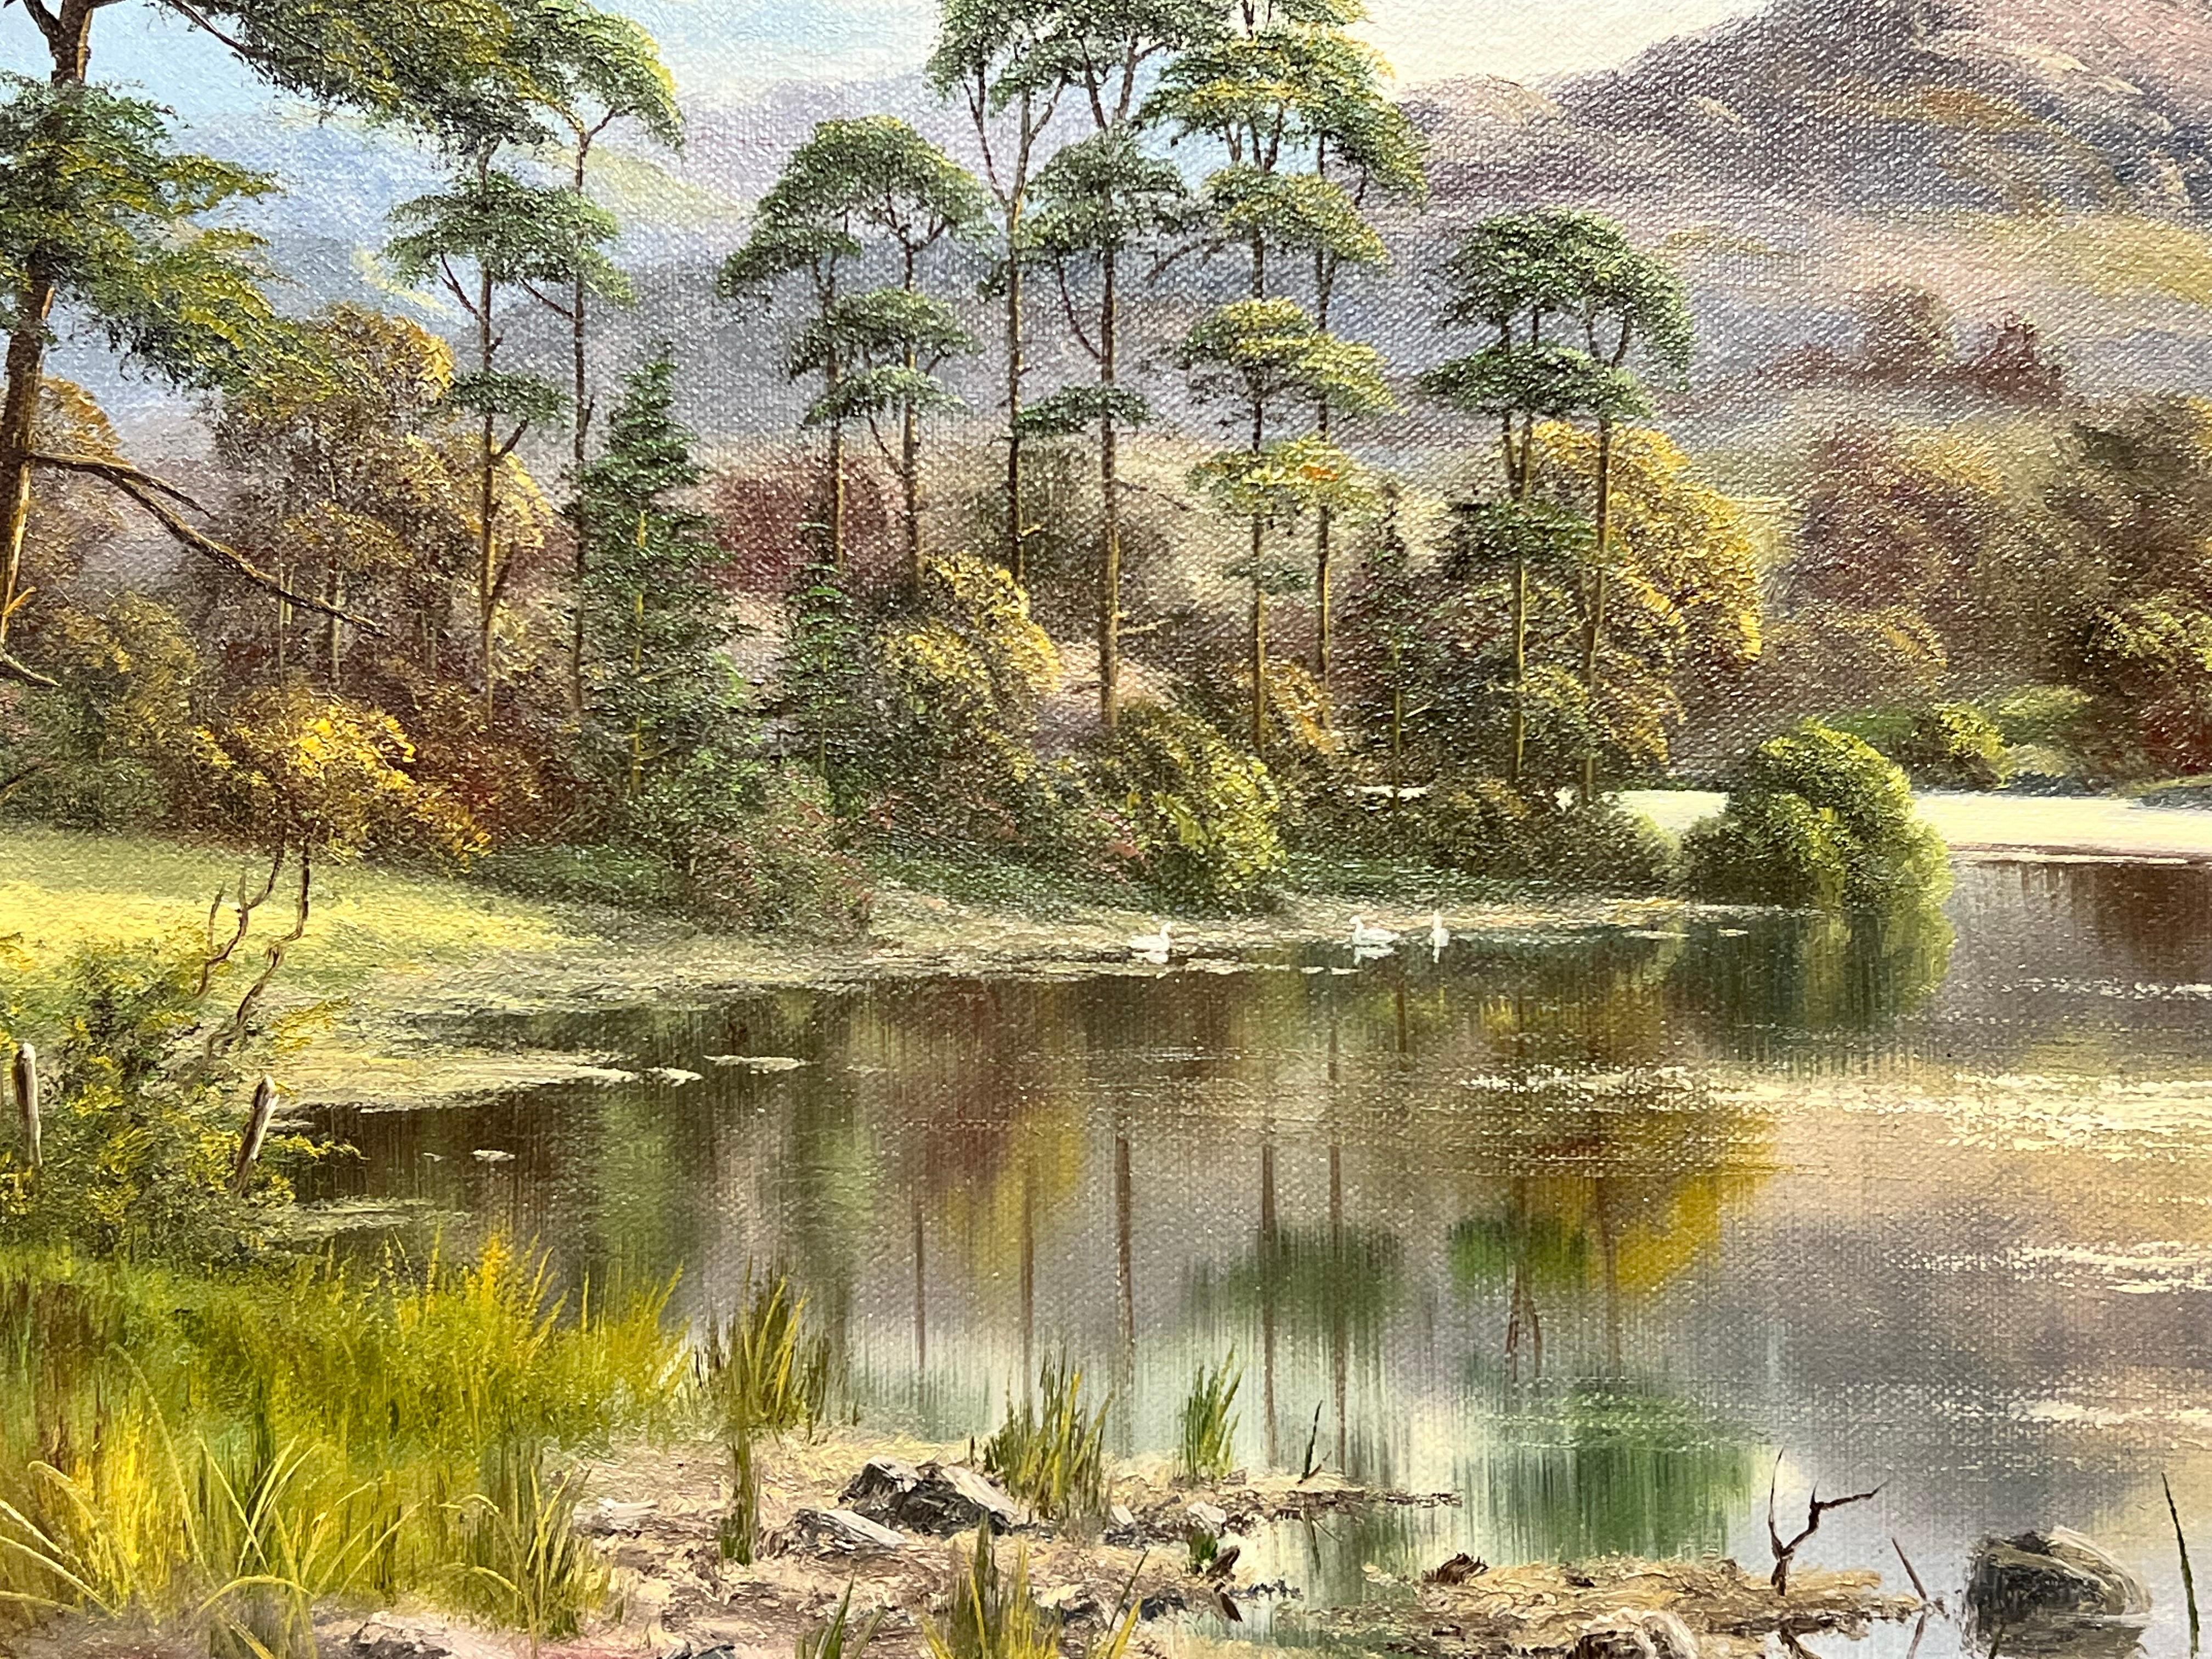 Artist/ School: British School, late 20th century, signed by the artist Spencer Coleman

Title: The Scottish Highland Loch in the Summer

Medium: oil on canvas, framed 

Framed: 18 x 22 inches
Painting: 12 x 16 inches

Provenance: private